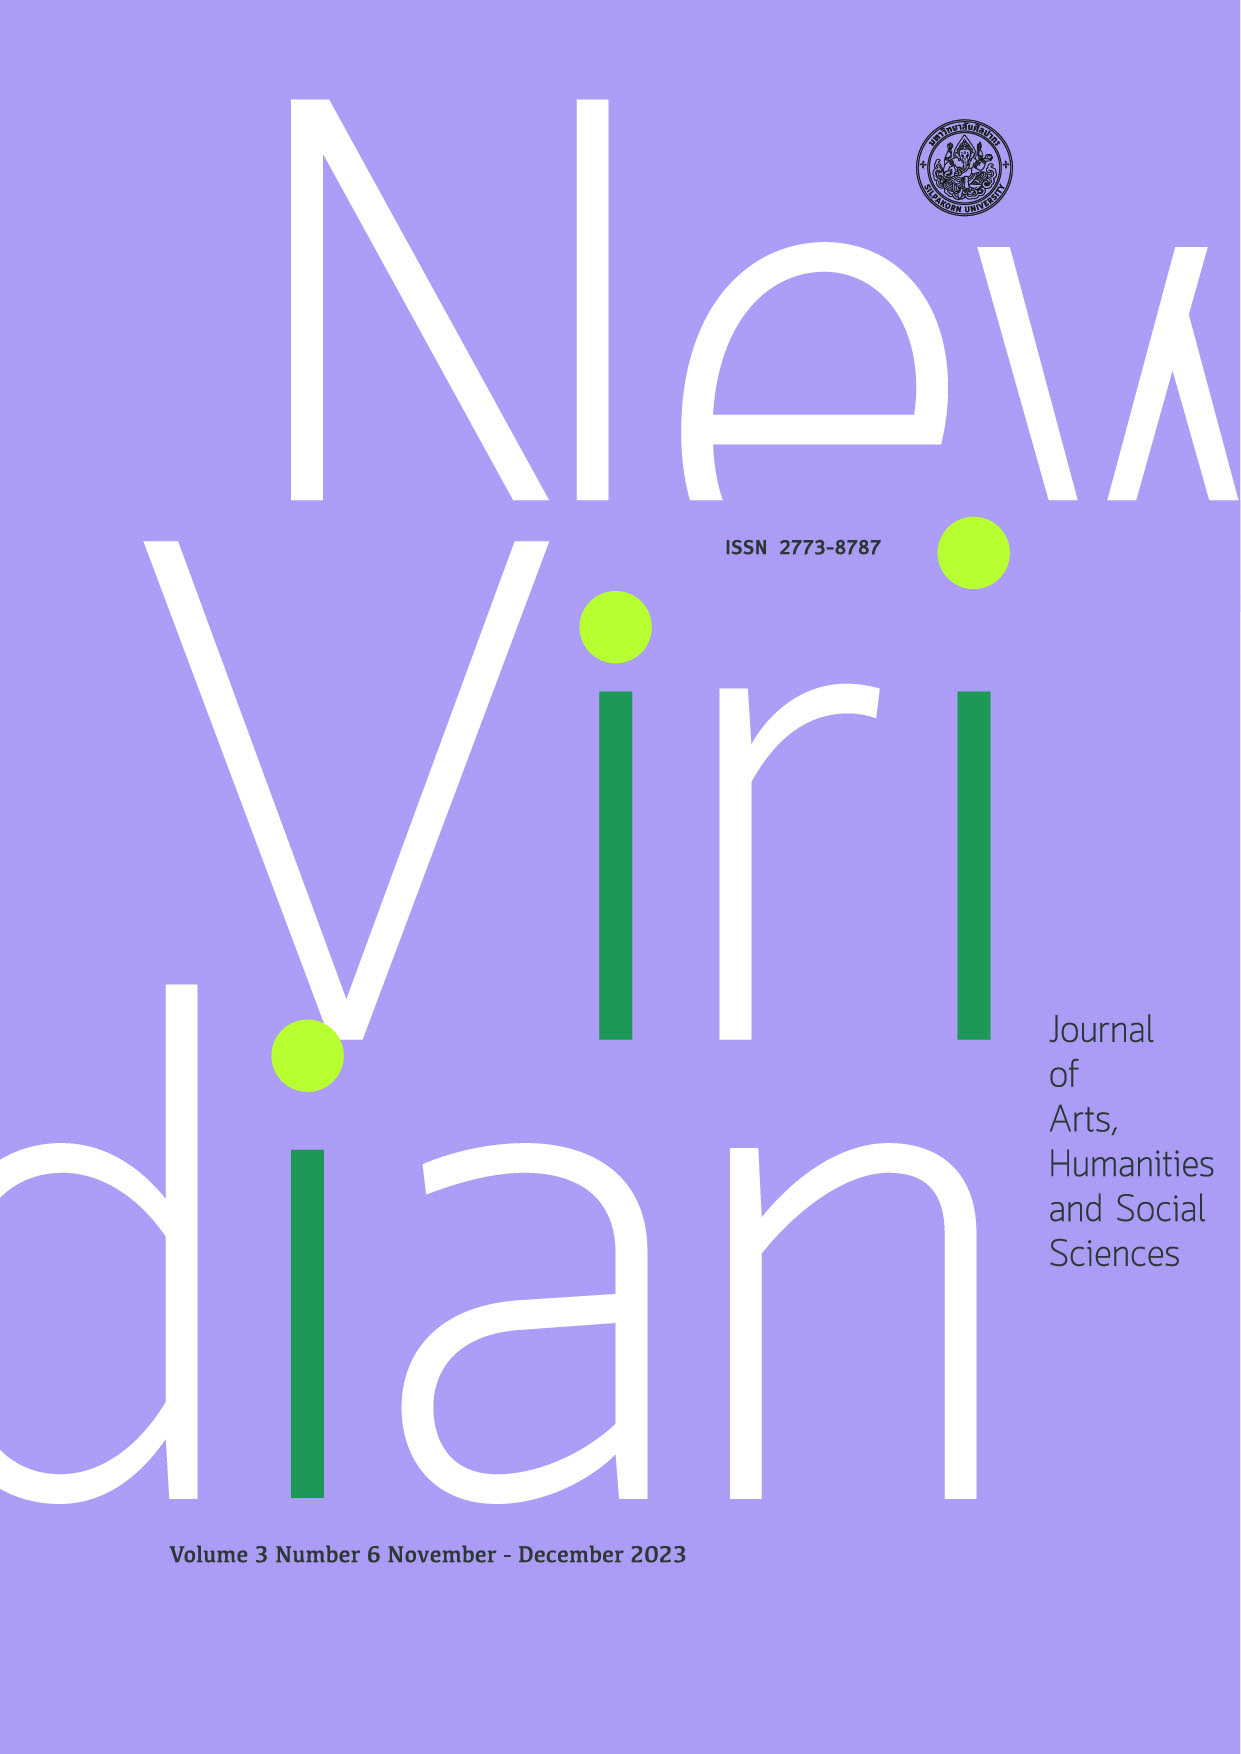 					View Vol. 3 No. 6 (2023): The New Viridian Journal of Arts, Humanities and Social Sciences (November – December 2023)
				